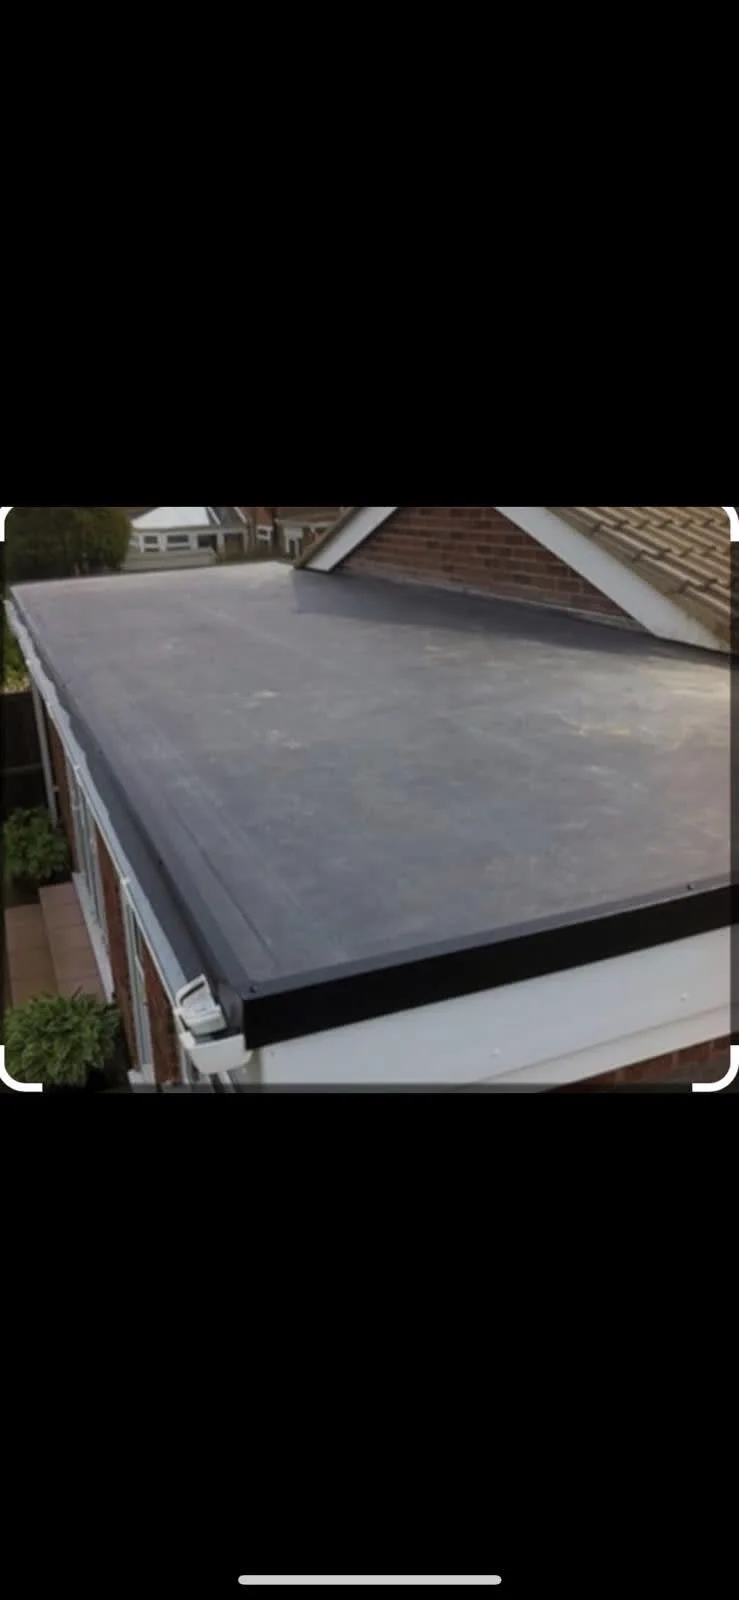 D and J Roofing Midlands Ltd Solihull 07988 253802